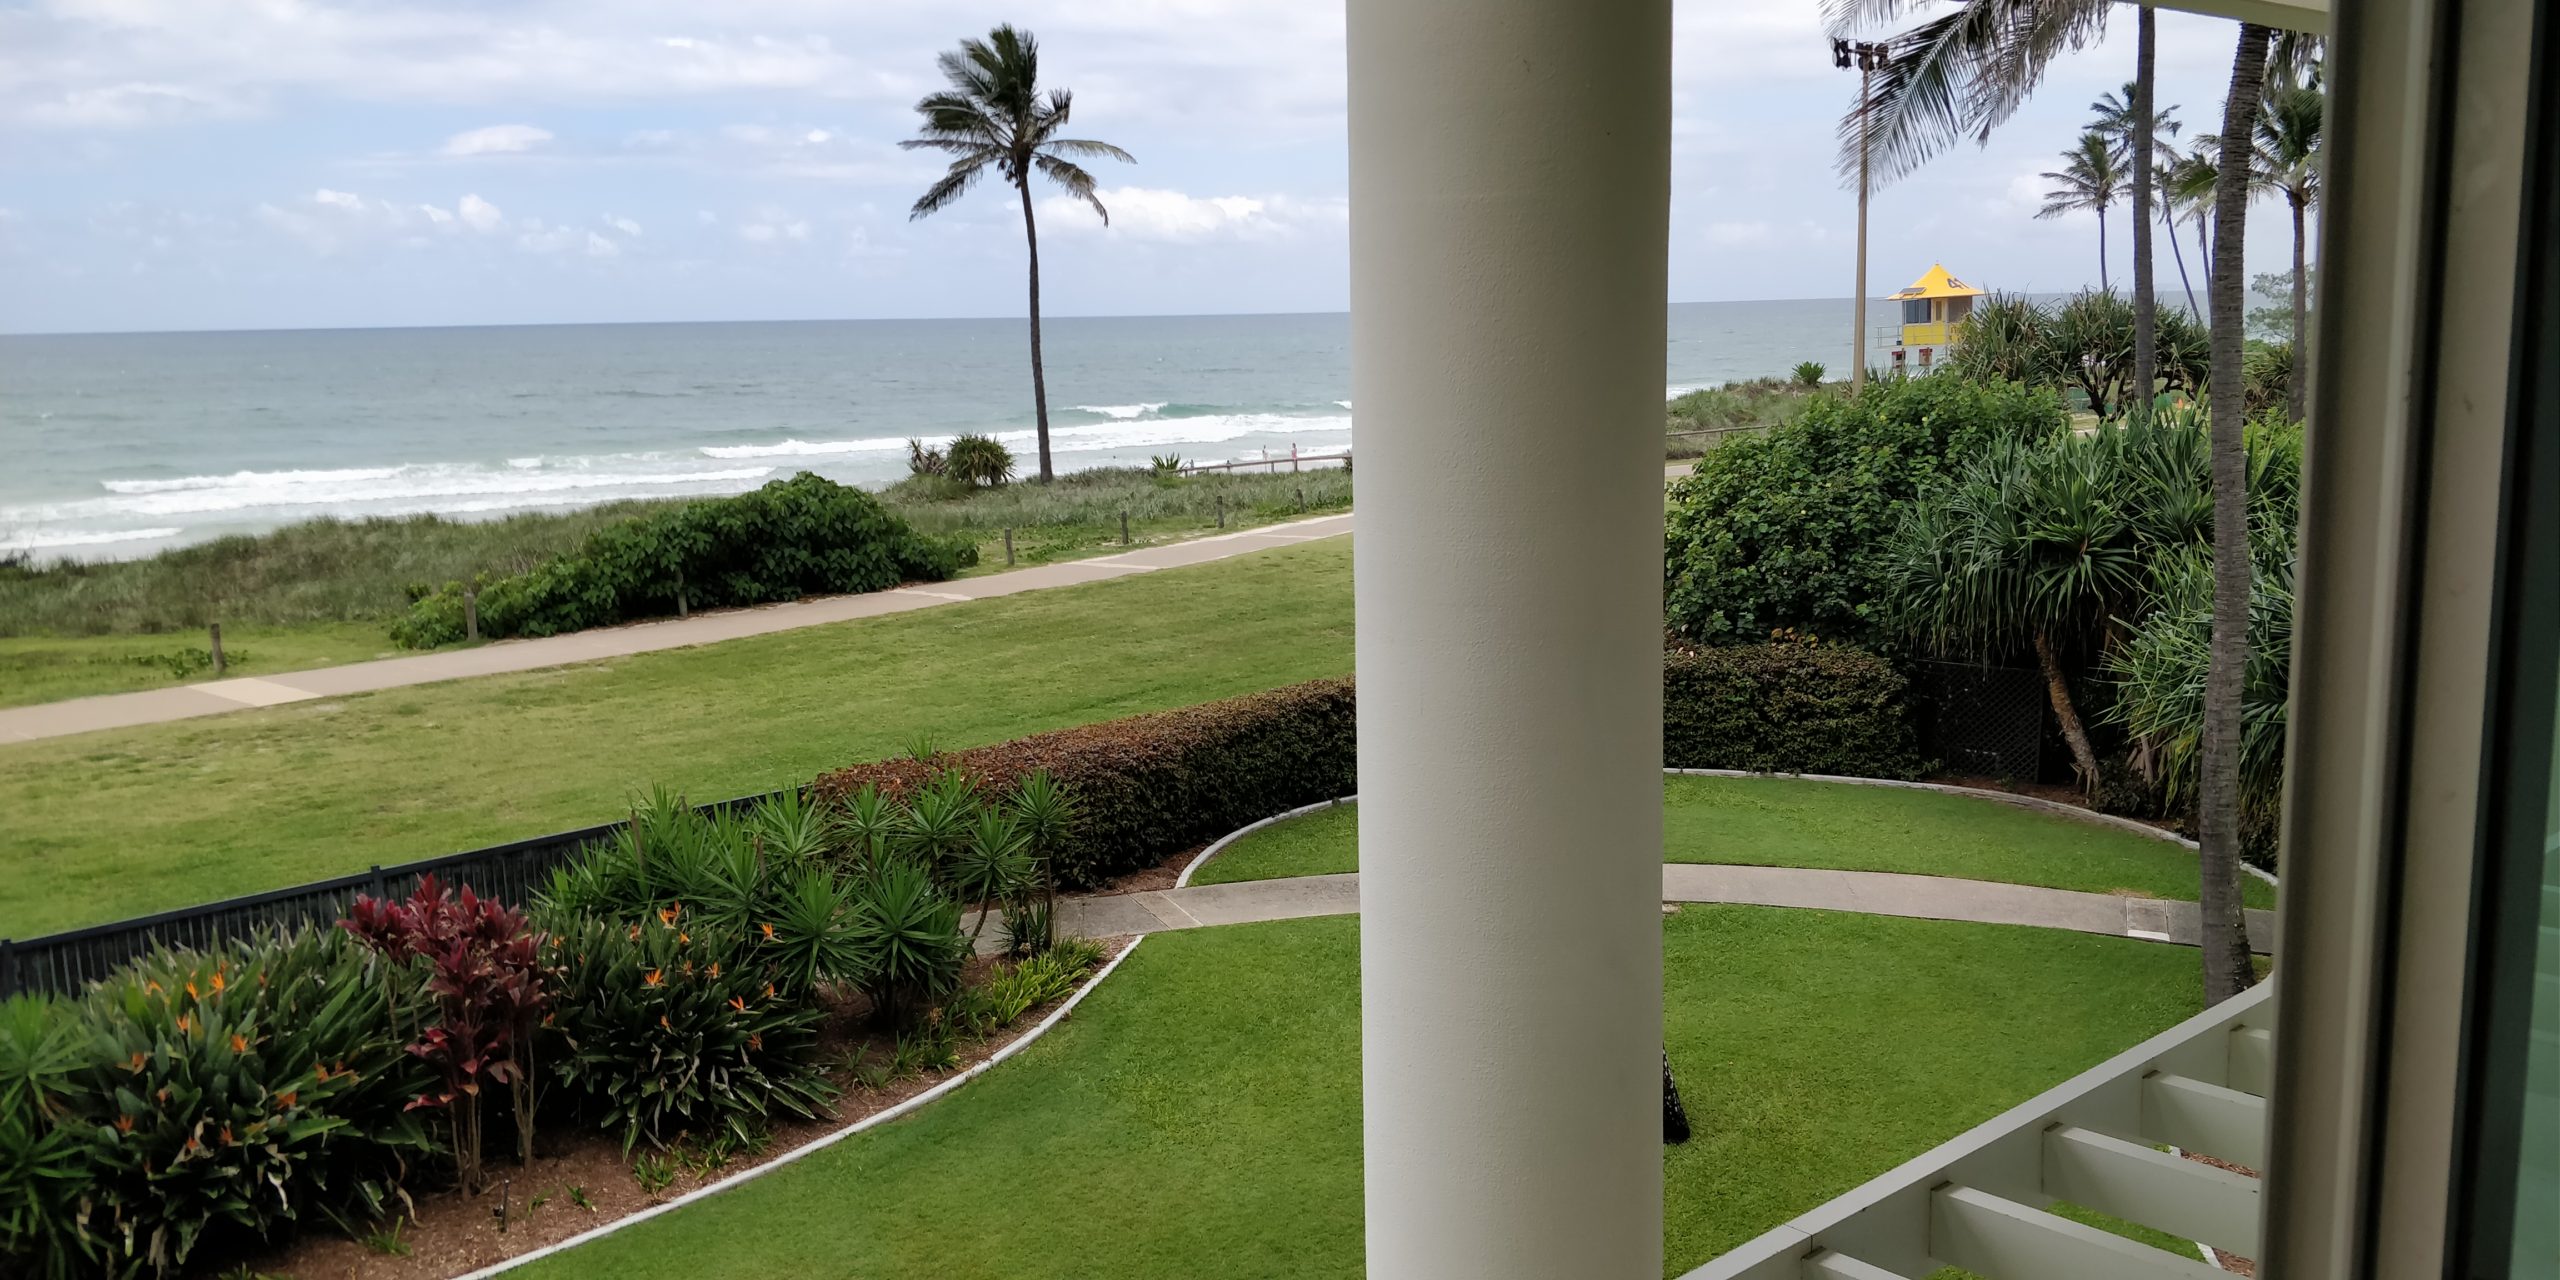 Review the Grand Mirage Resort picture of the view from the room window capturing the surf and life guard box